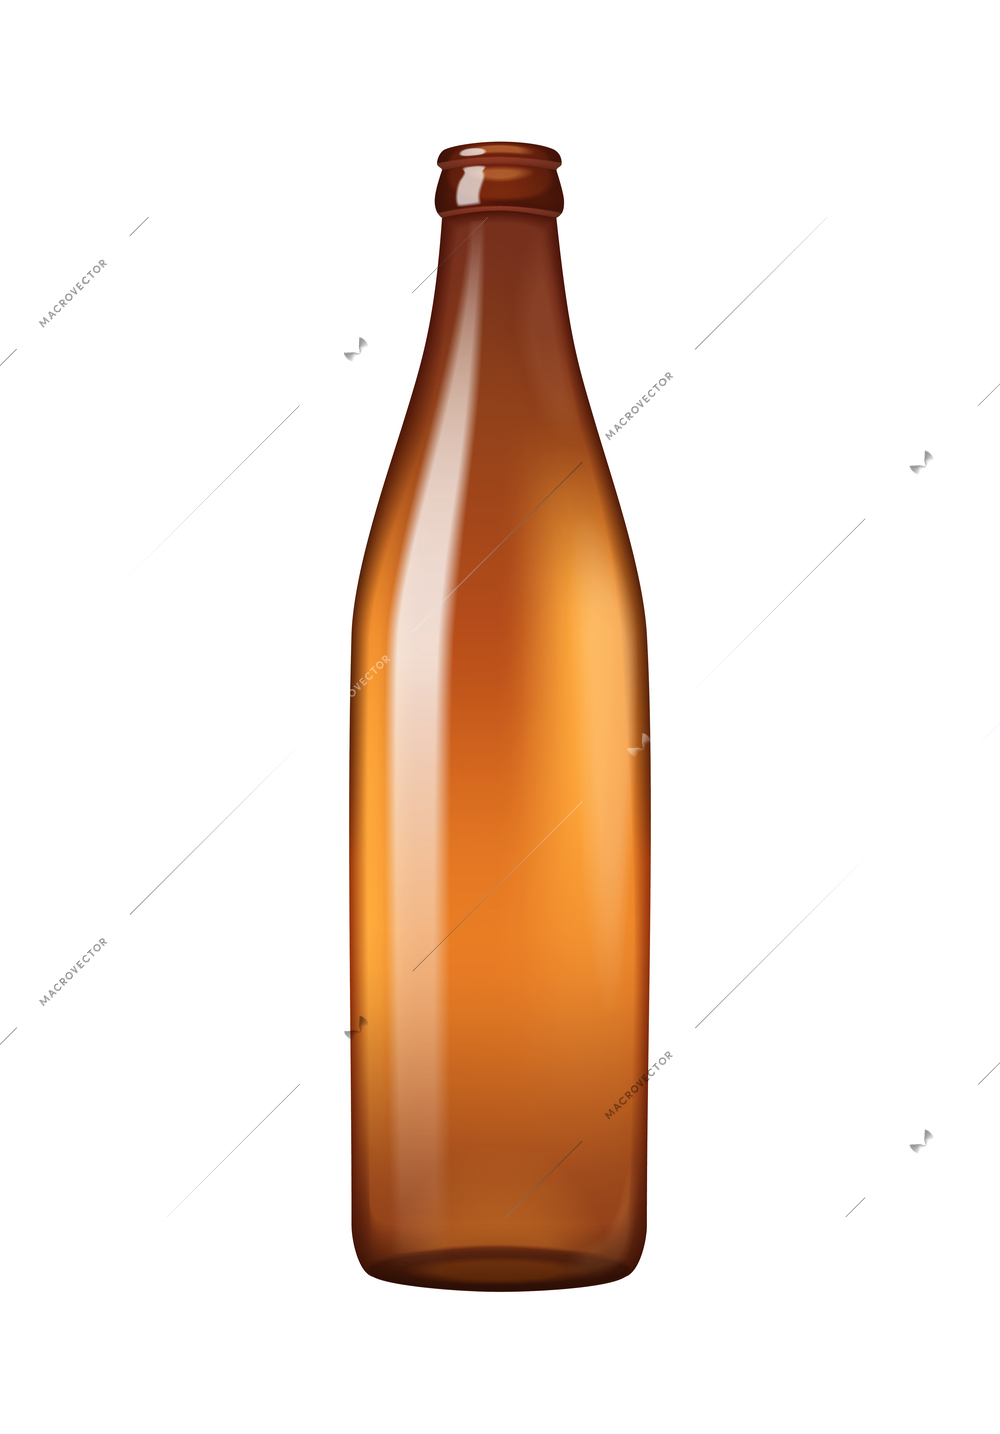 Realistic empty brown glass bottle vector illustration